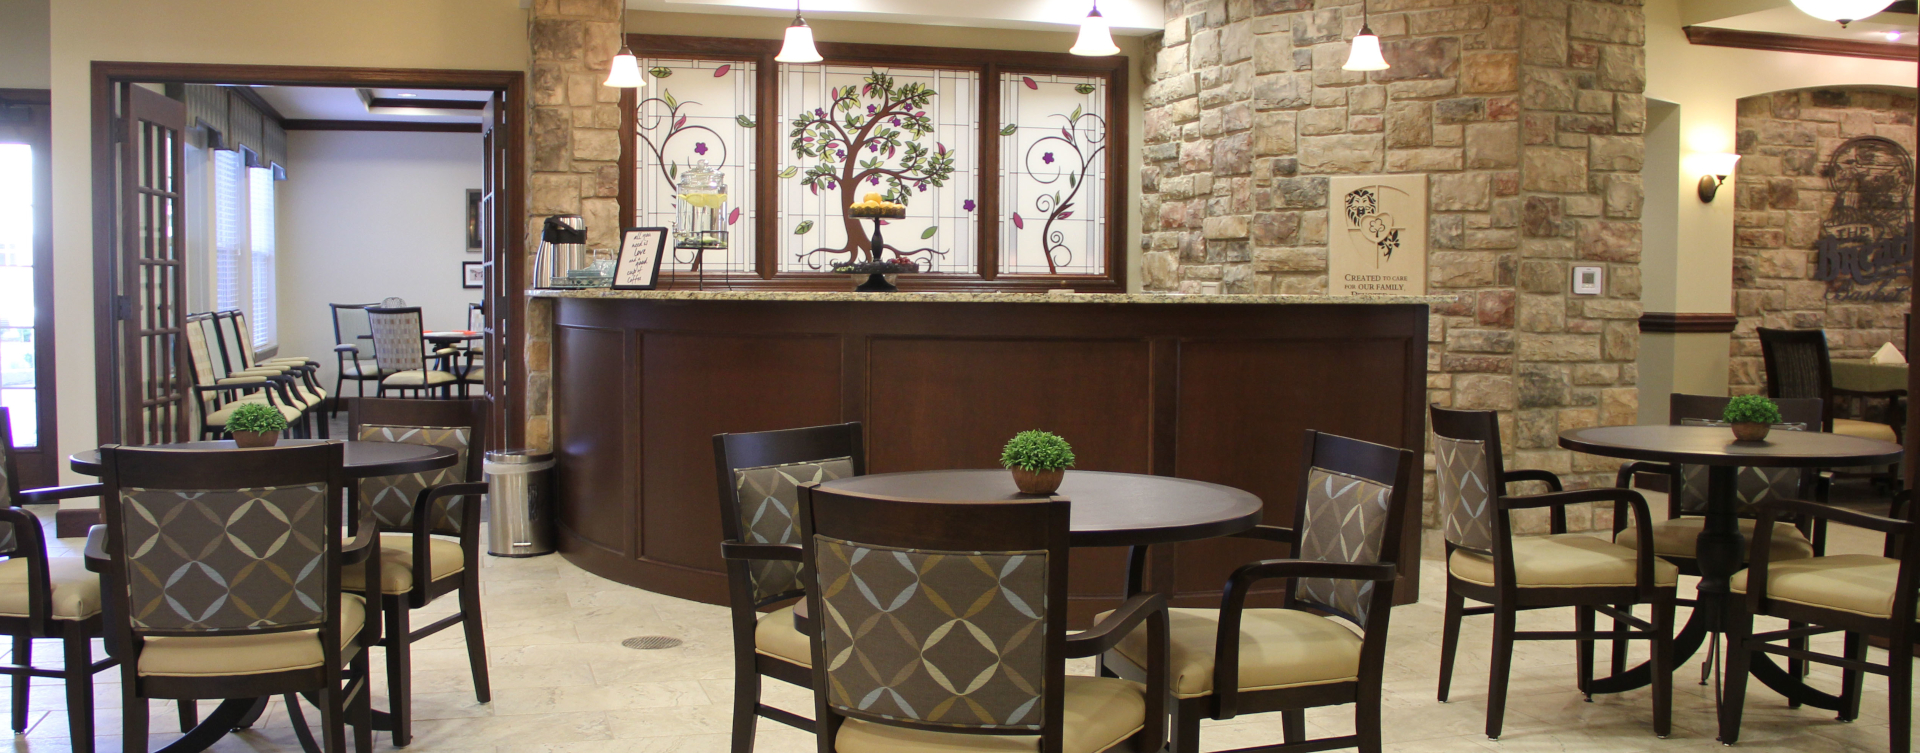 We’re serving up snacks, beverages and service around the clock in the bistro at Bickford of Tinley Park